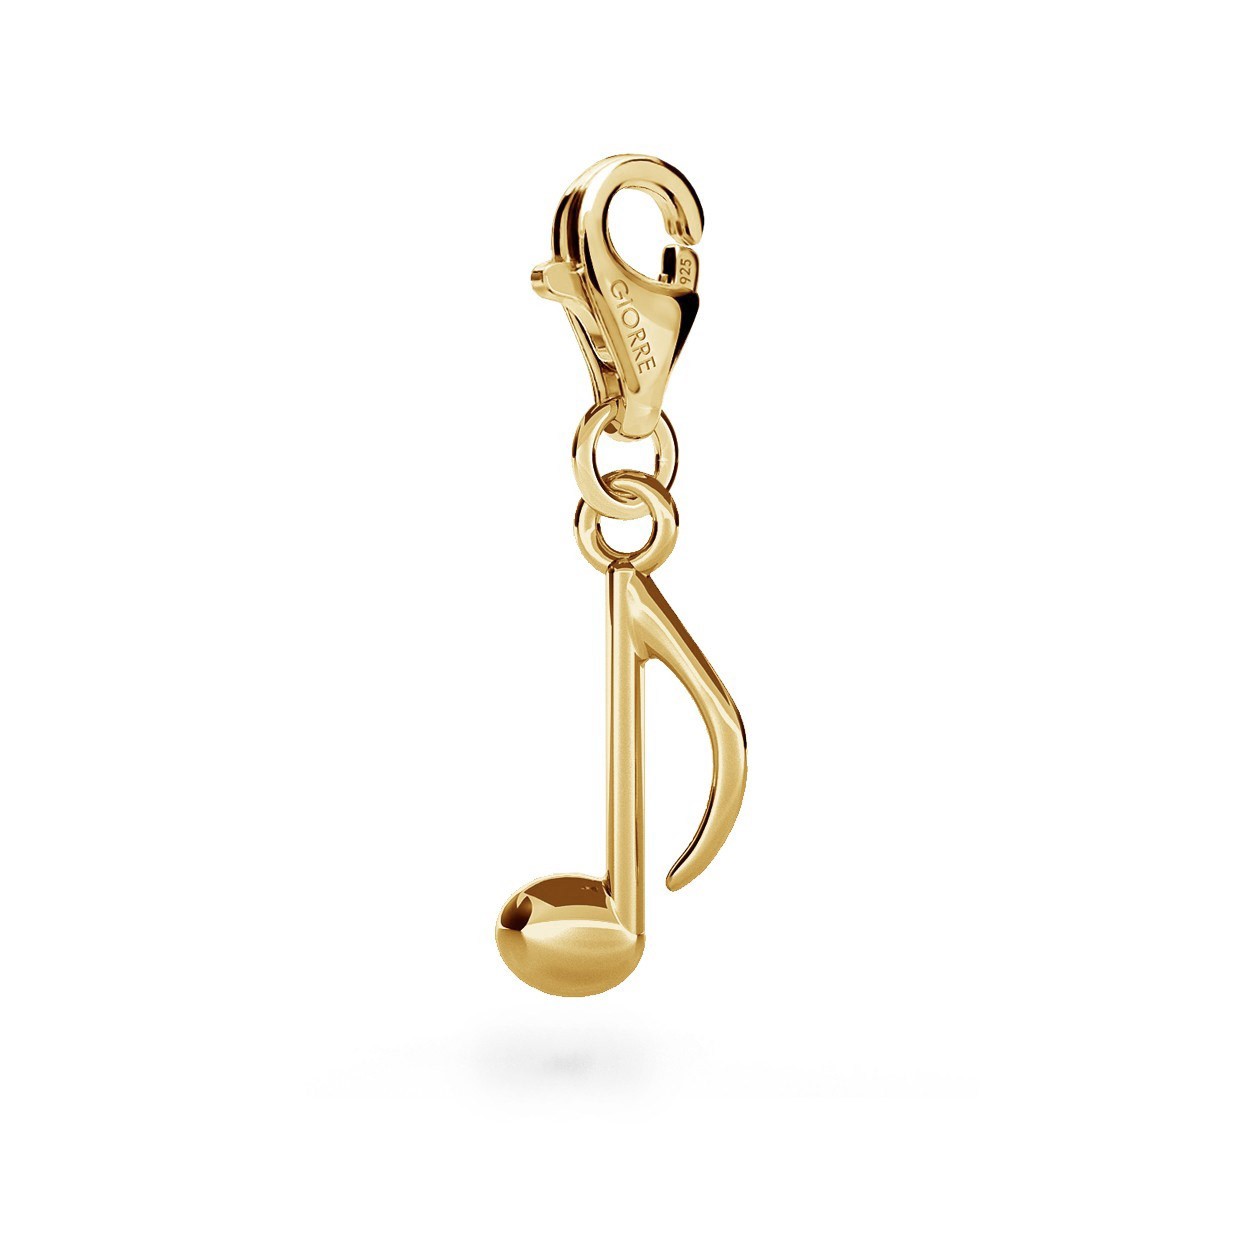 CHARM 23, NOTE, SILVER 925, RHODIUM OR GOLD PLATED